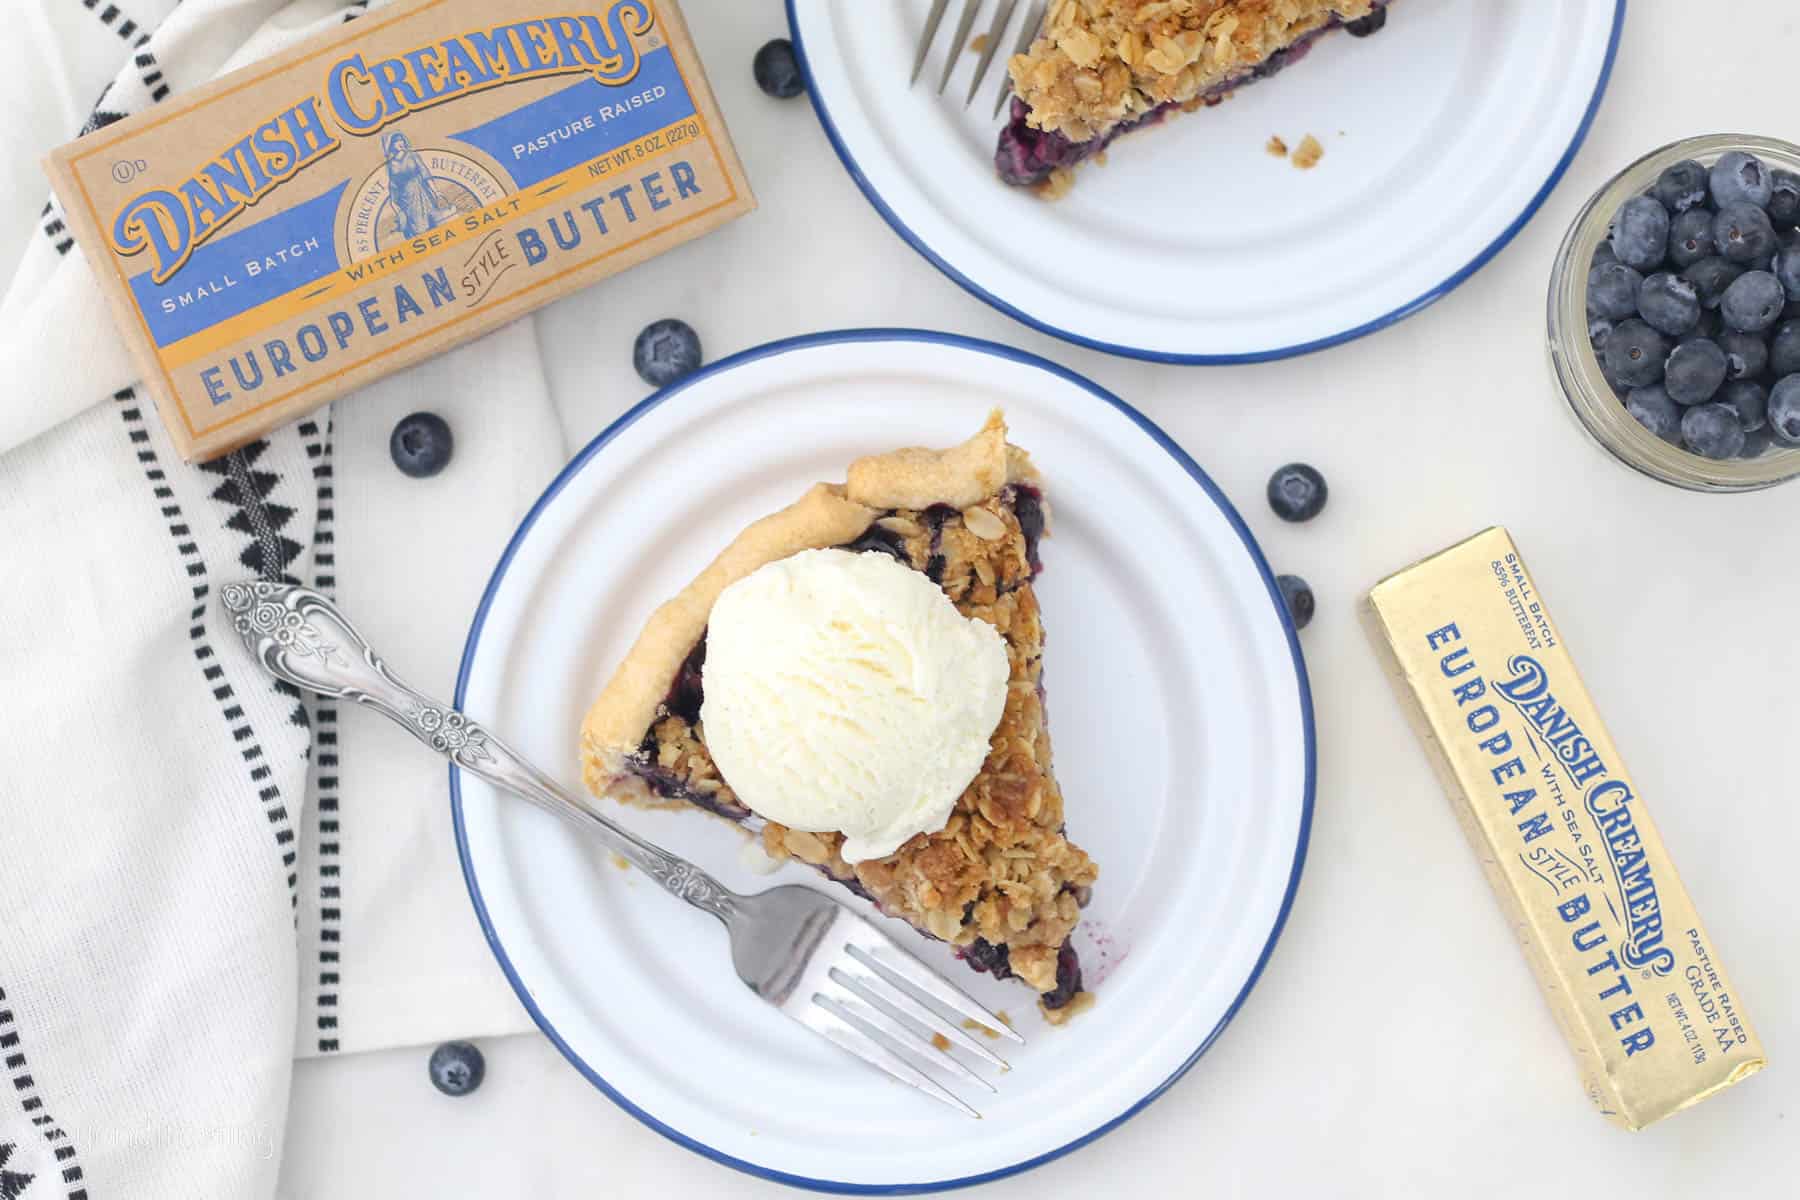 Overhead view of a slice of blueberry crumble pie on a plate, topped with a scoop of vanilla ice cream.